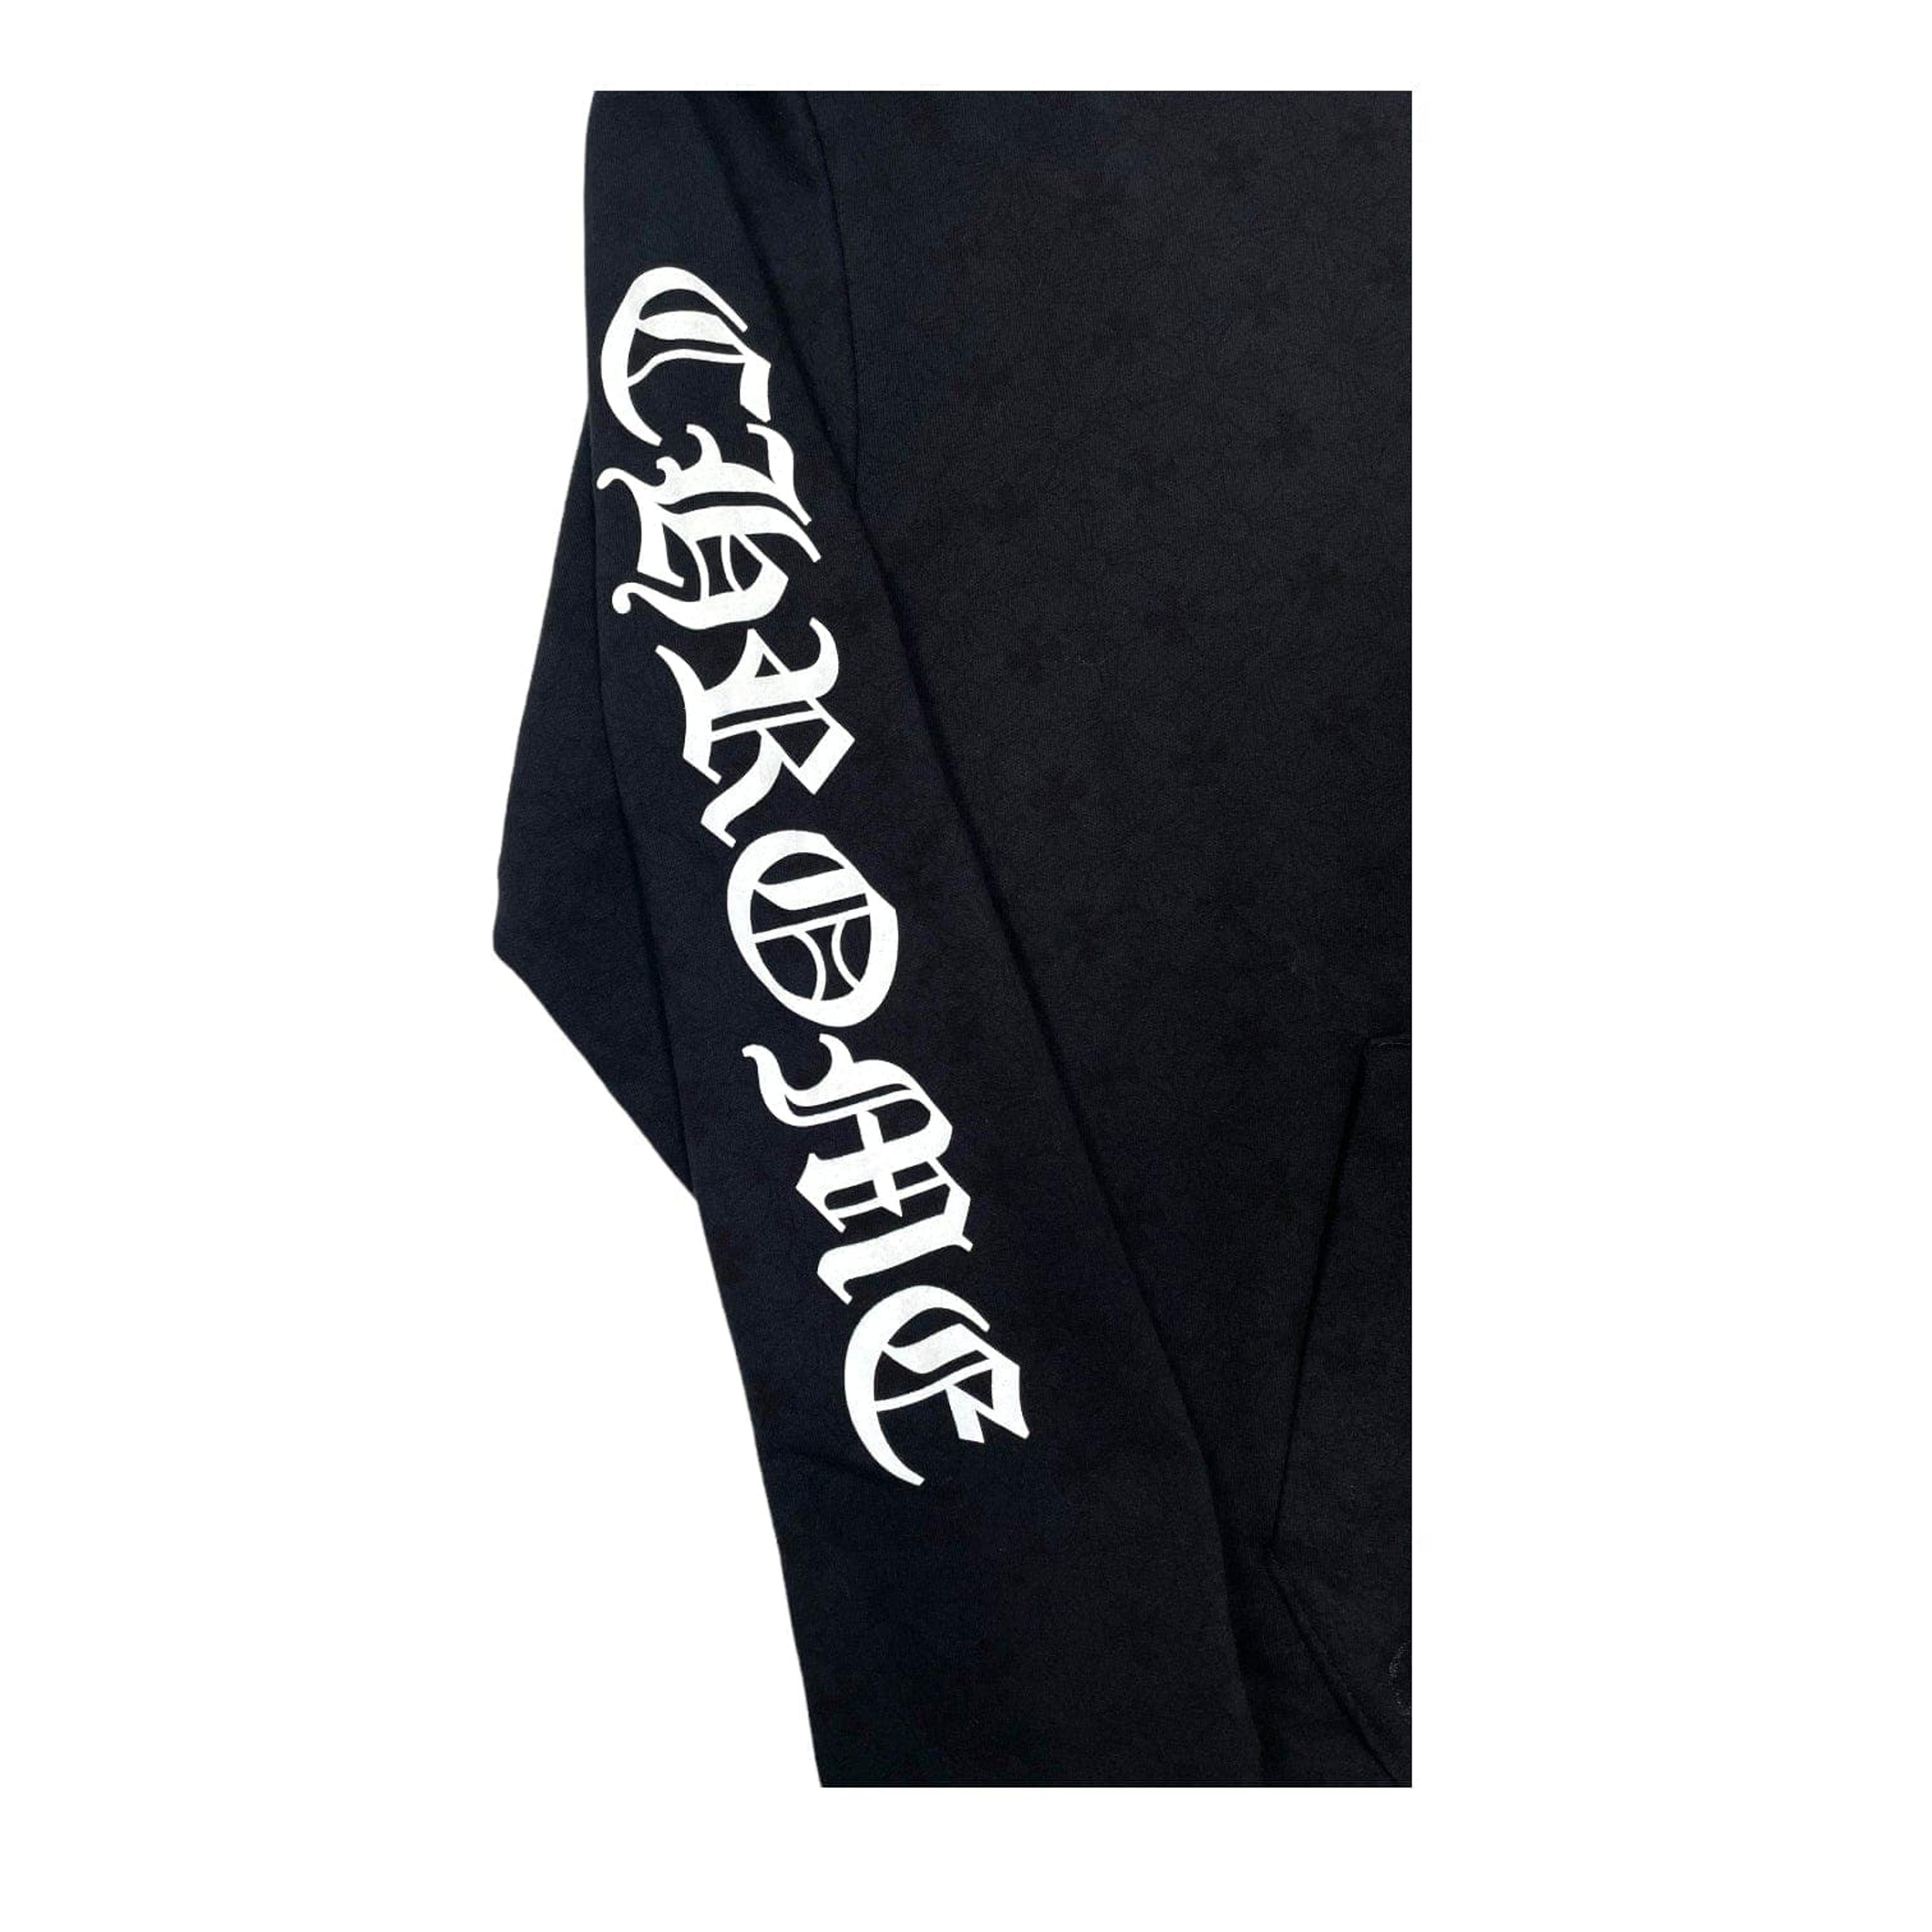 Alternate View 3 of Chrome Hearts Sublimated Vertical Logo Hooded Sweatshirt Black